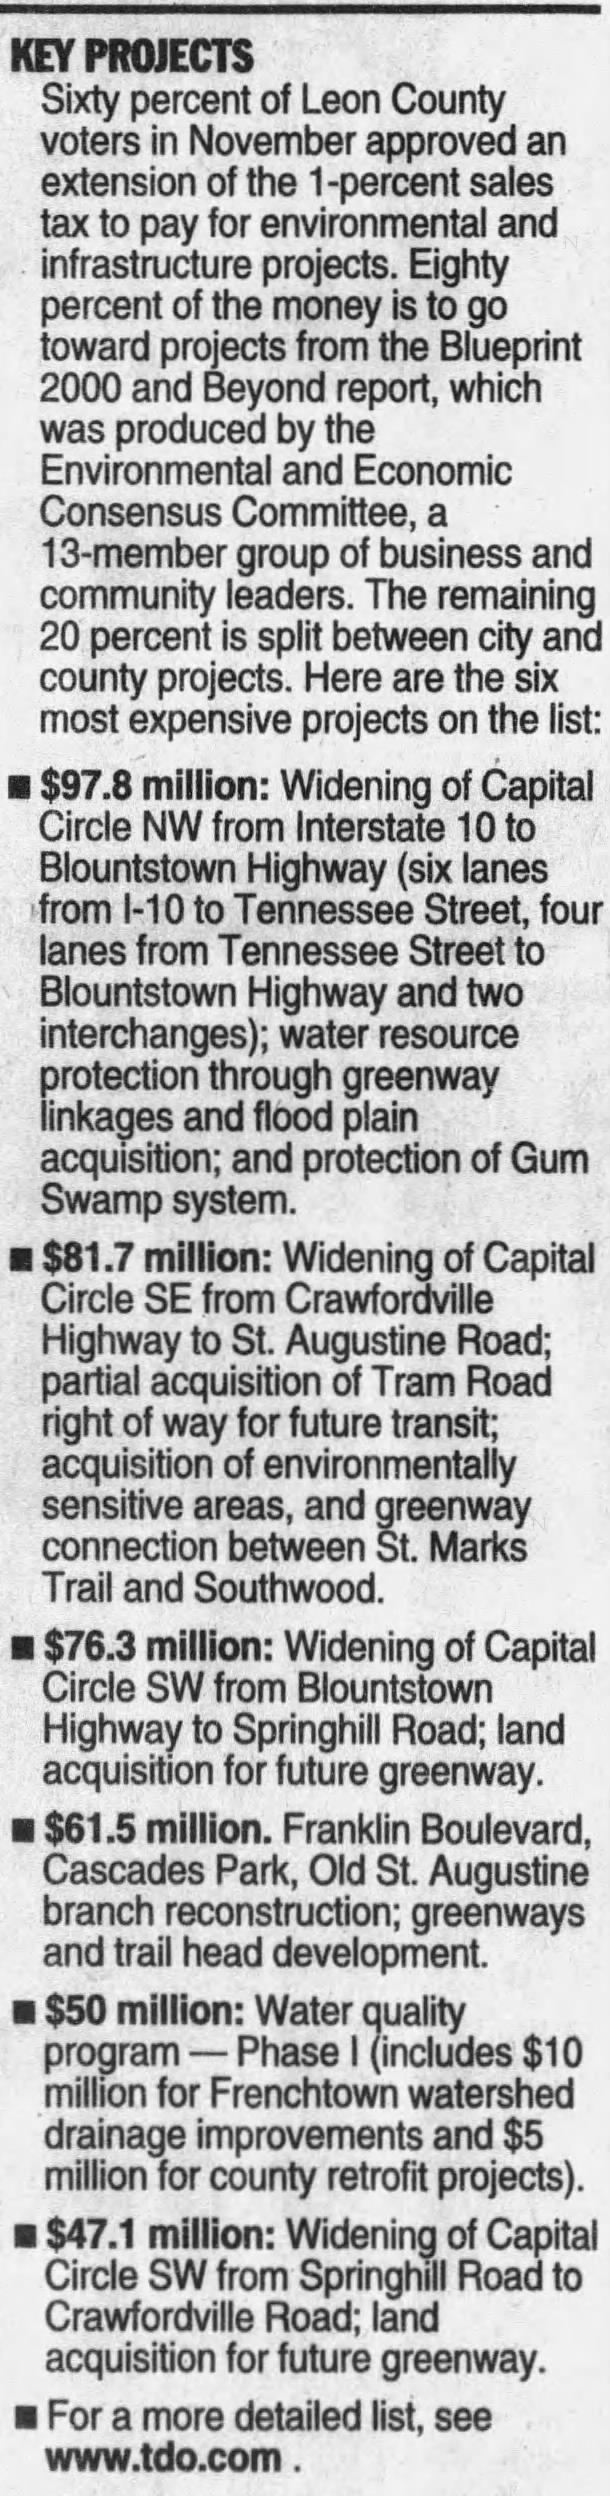 Key projects for Leon County 2000 TSPLOST